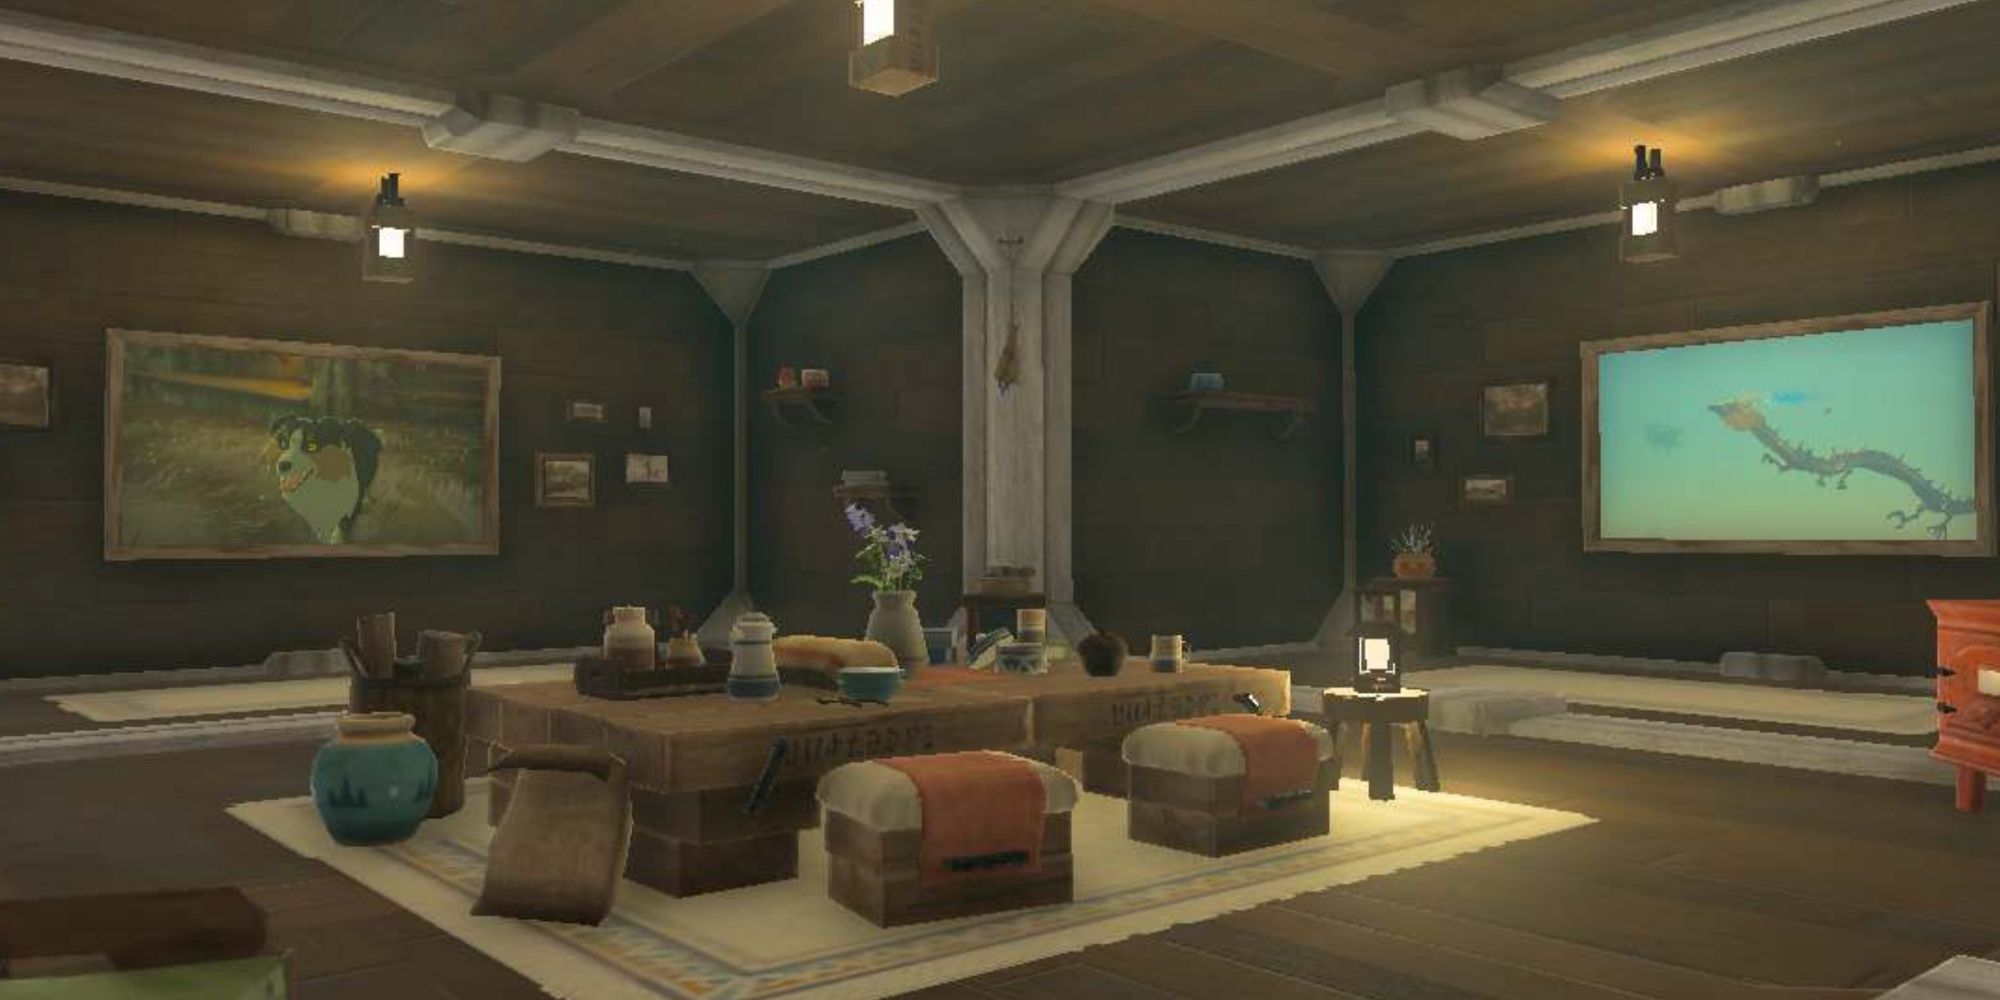 Tears of the Kingdom - Link's house with two gallery rooms showing photos of the light dragon and a dog